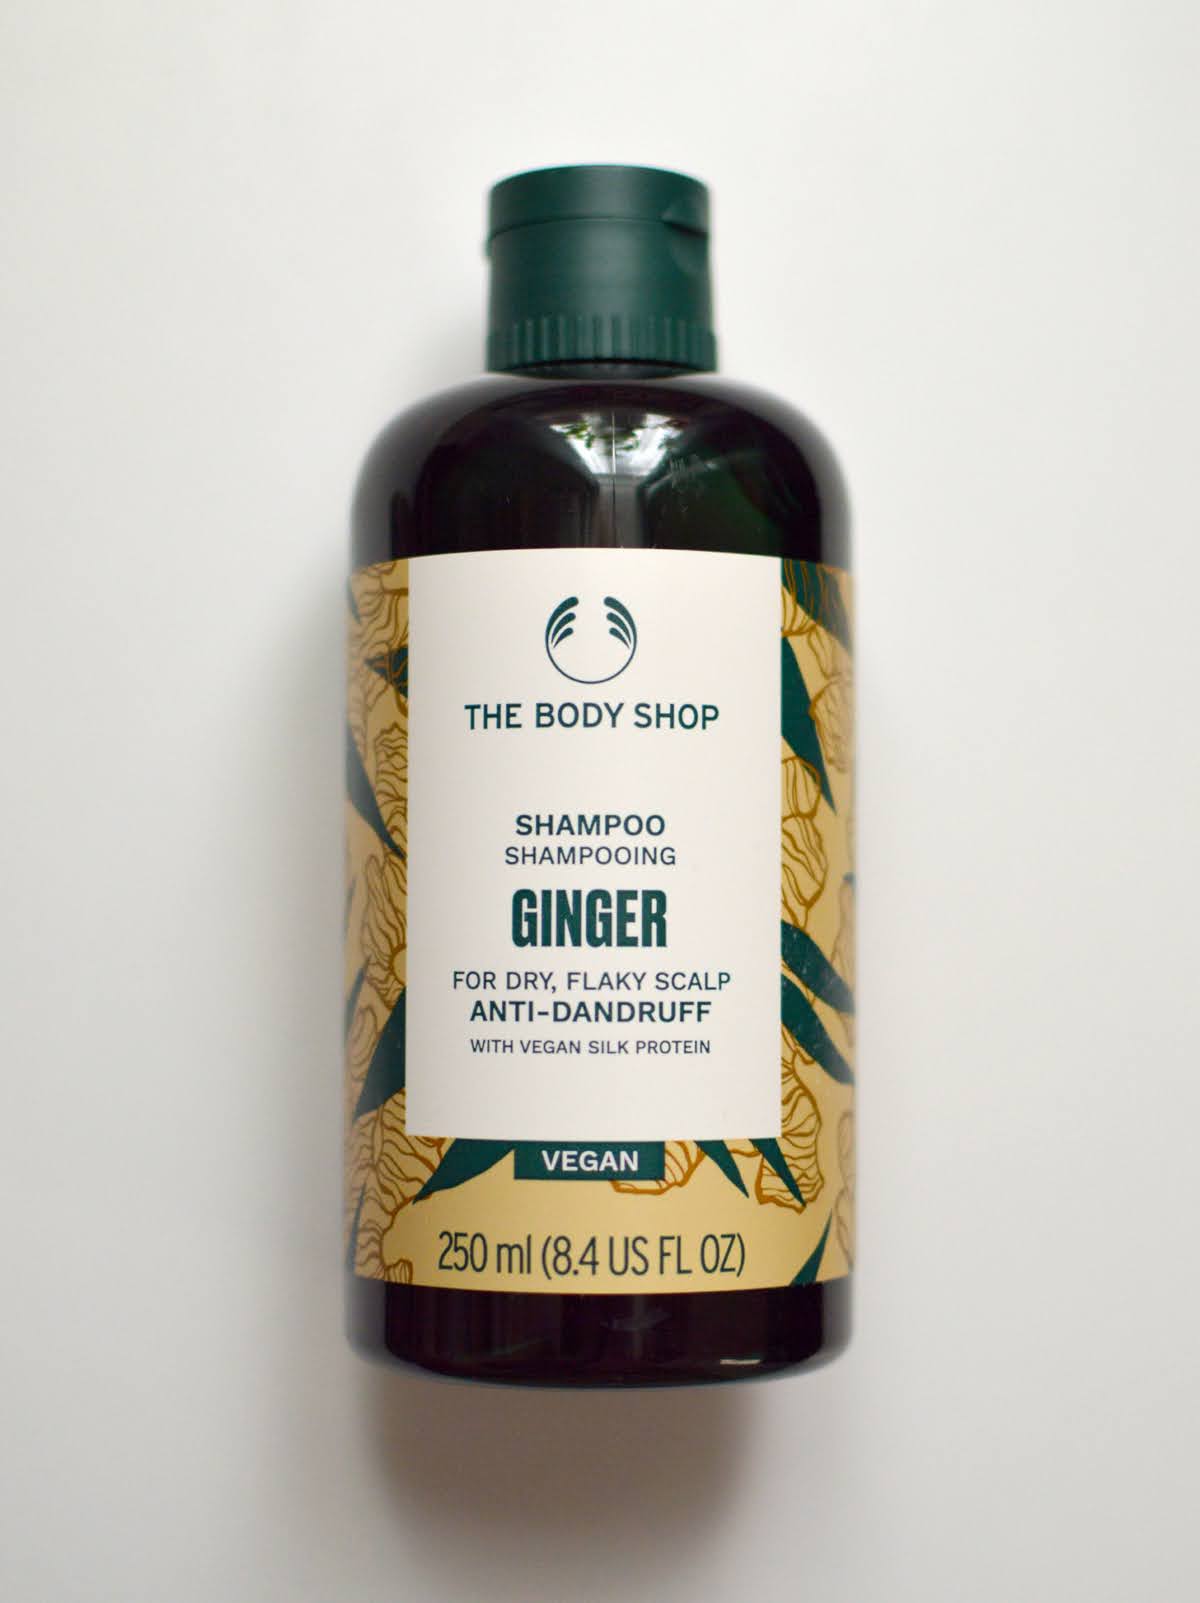 The Body Shop Ginger Shampoo & Black Friday Offers